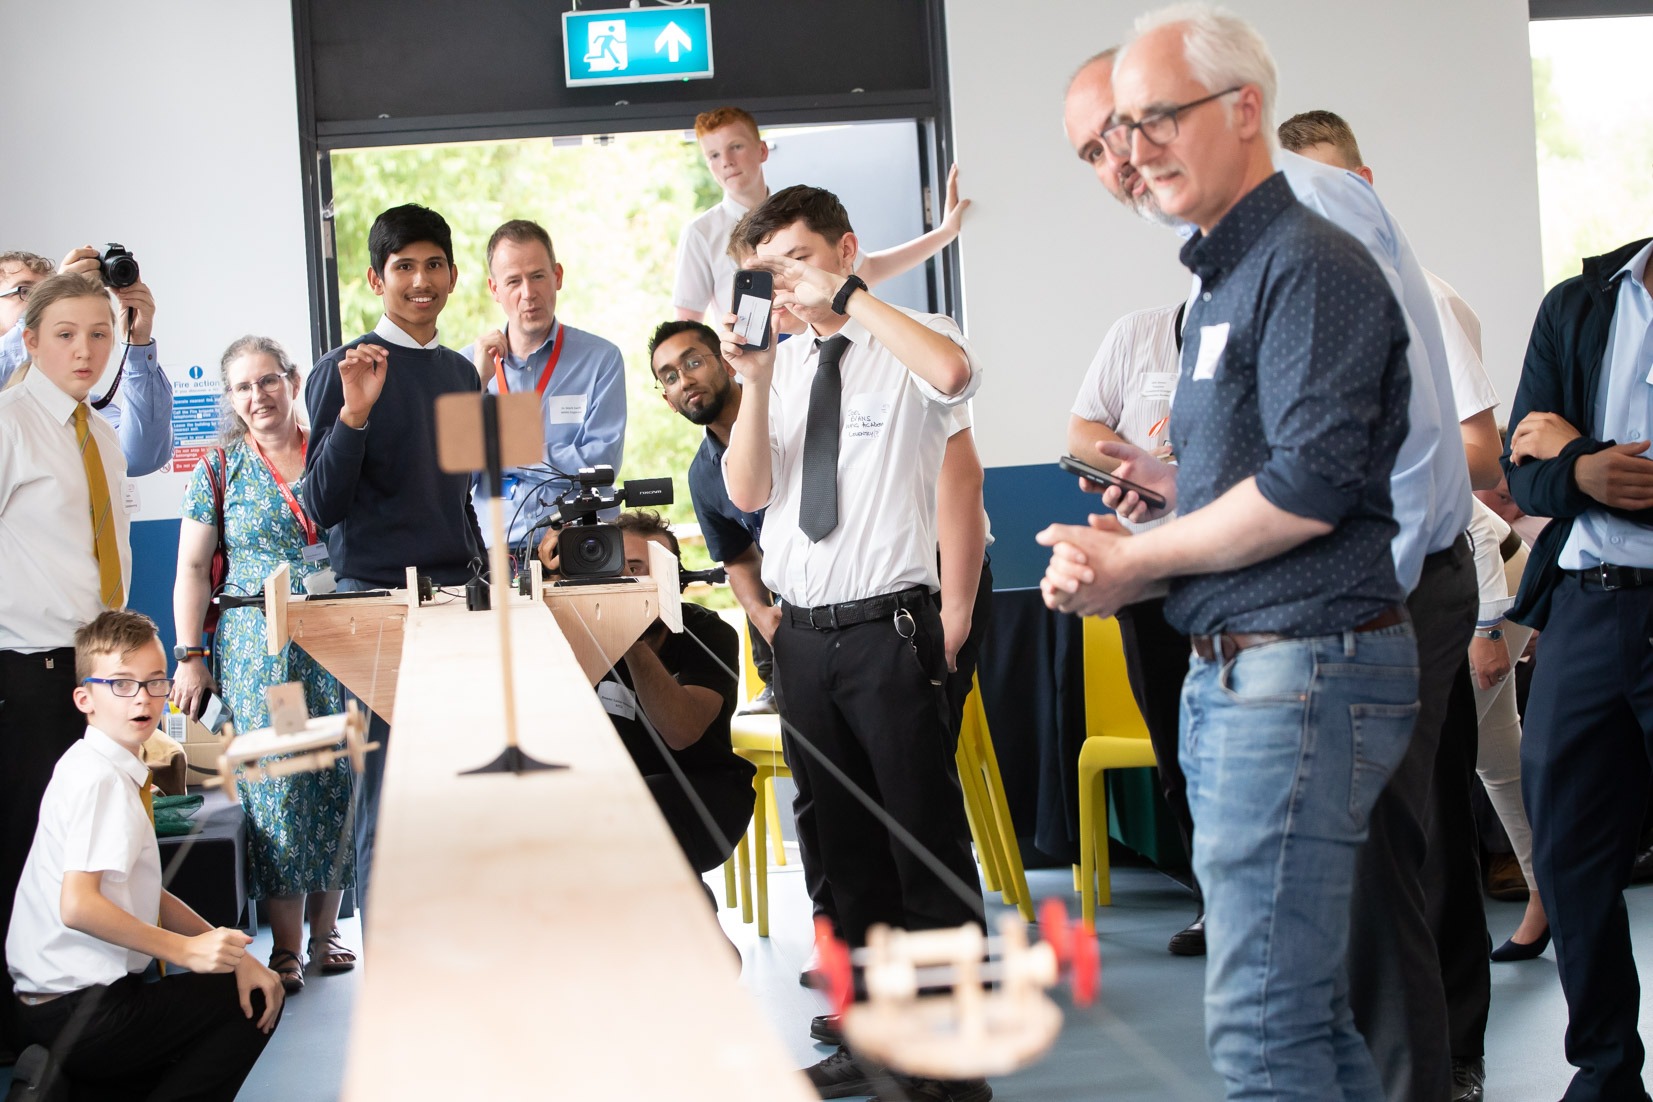 Young engineers hit the headlines with Design & Make triumph